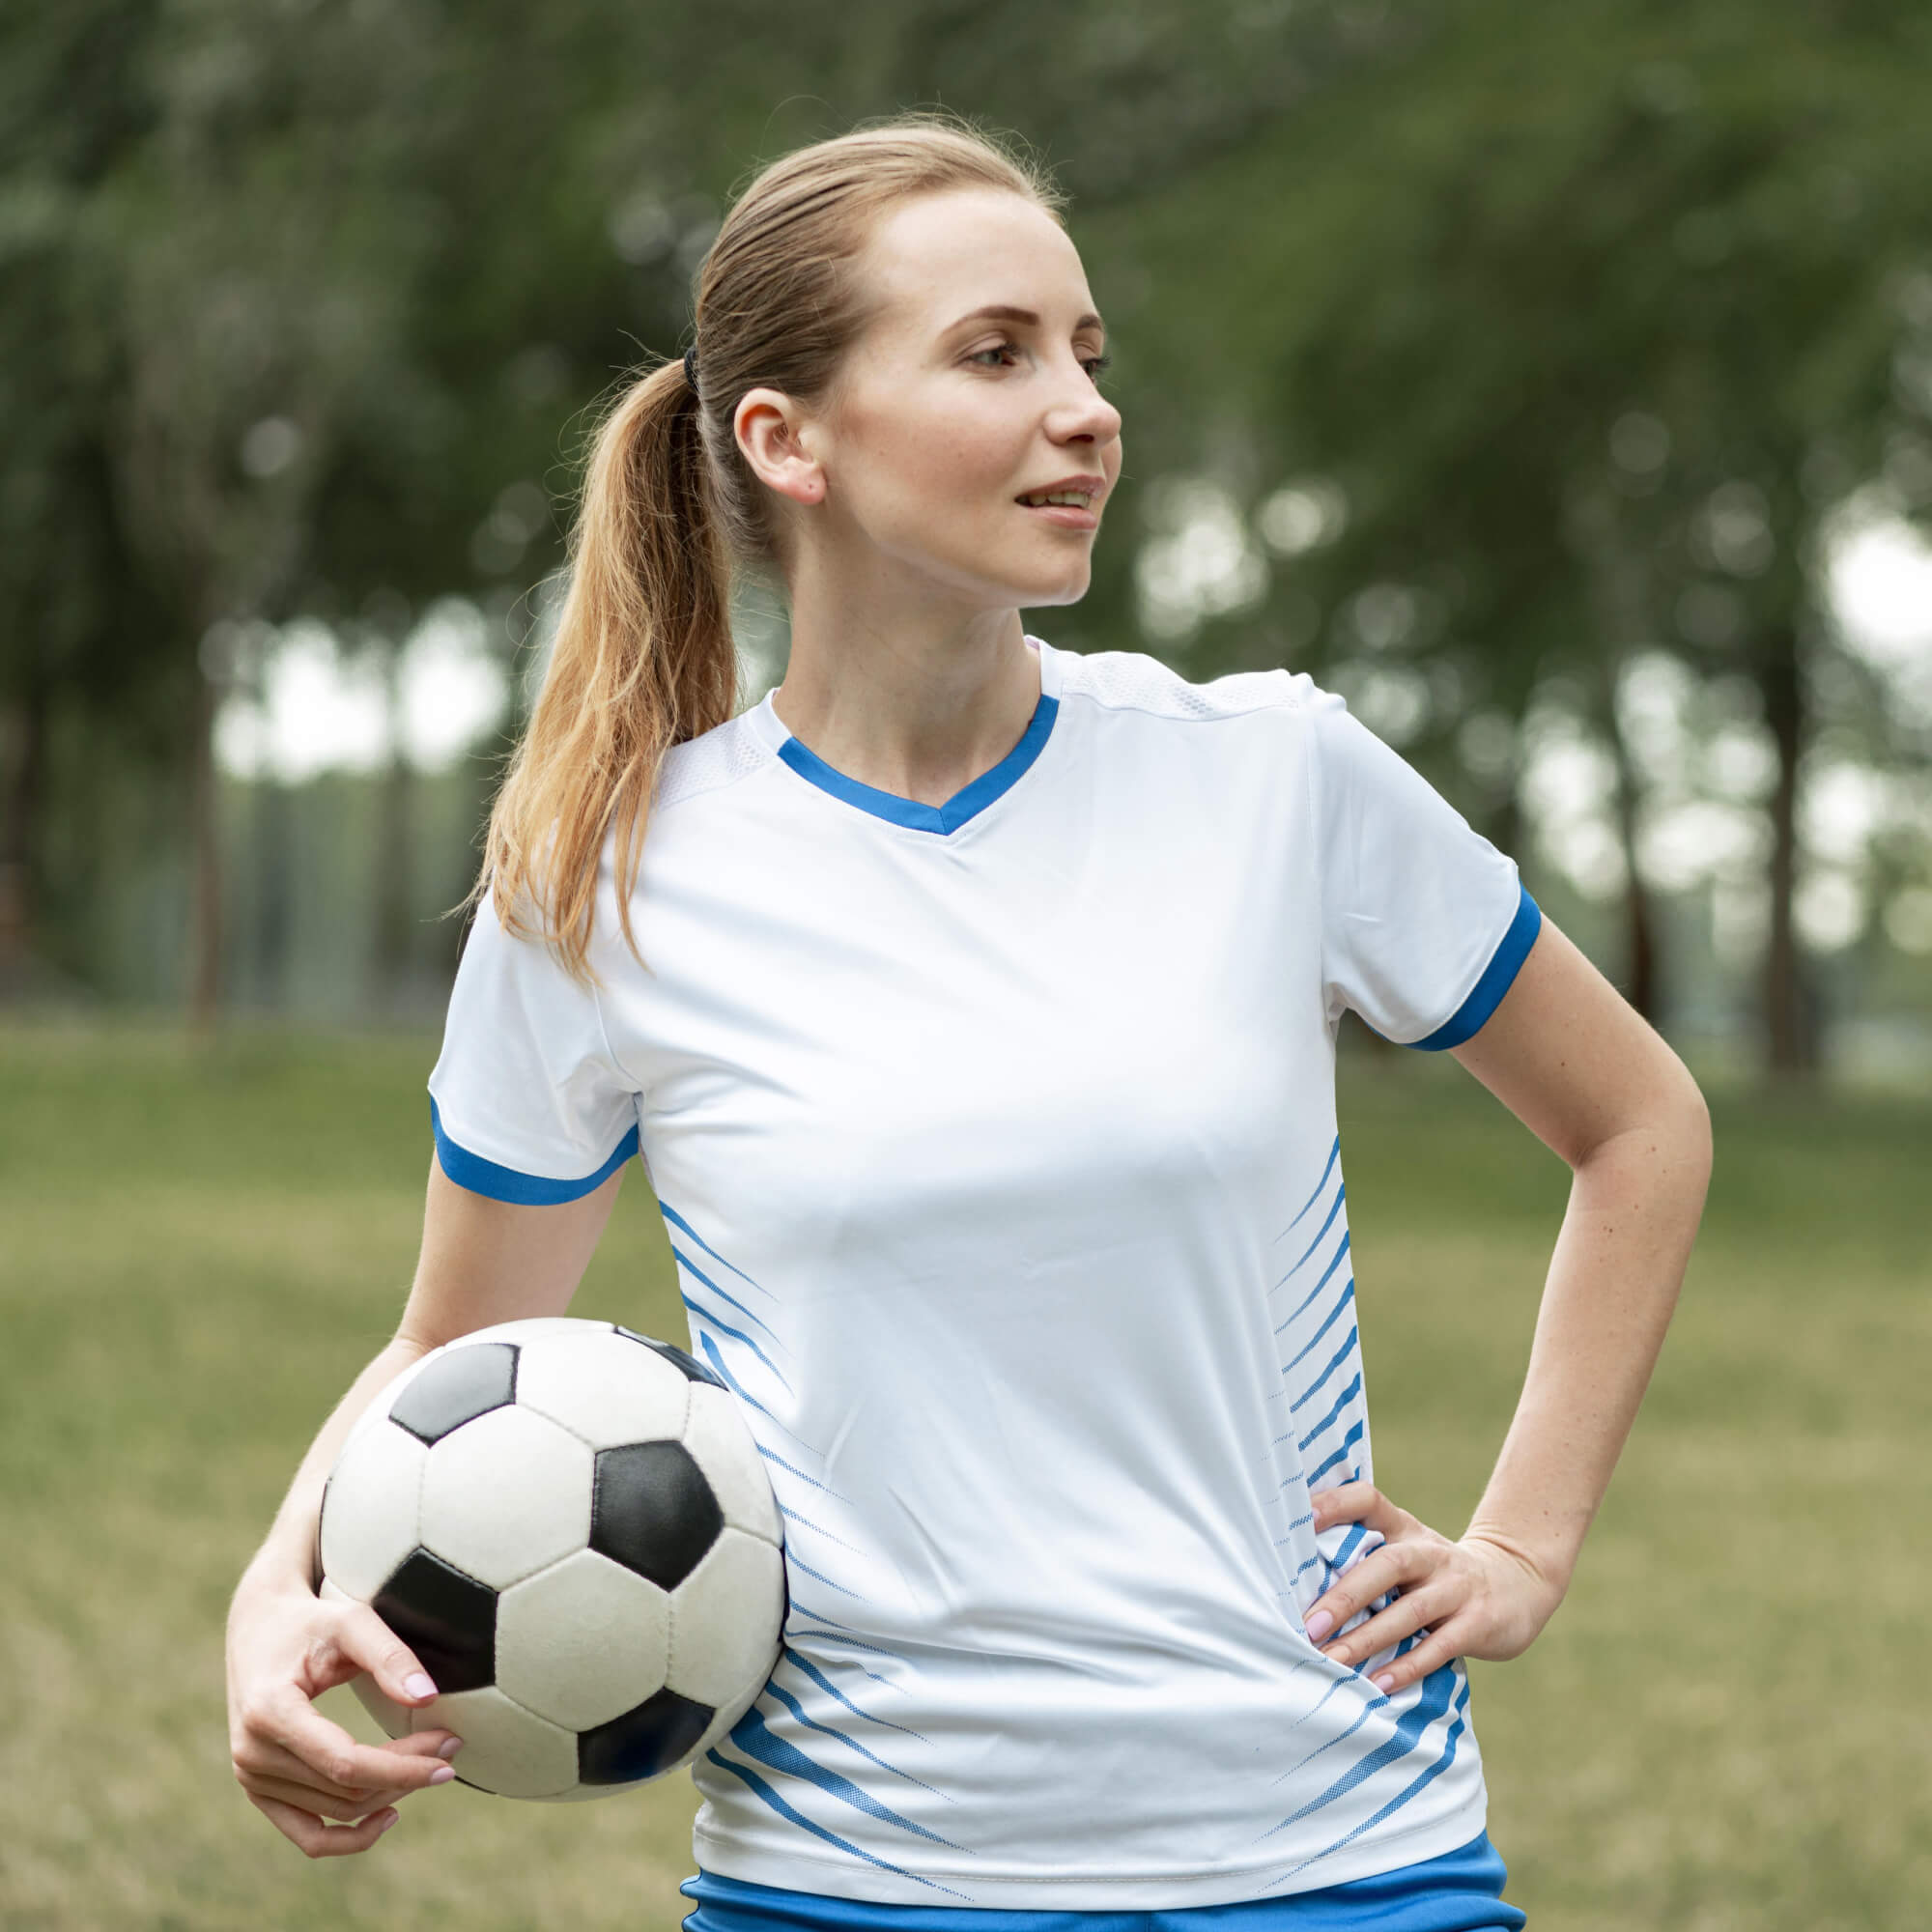 Why Choose Maxim Pro Sports for Your Sports Apparel Needs